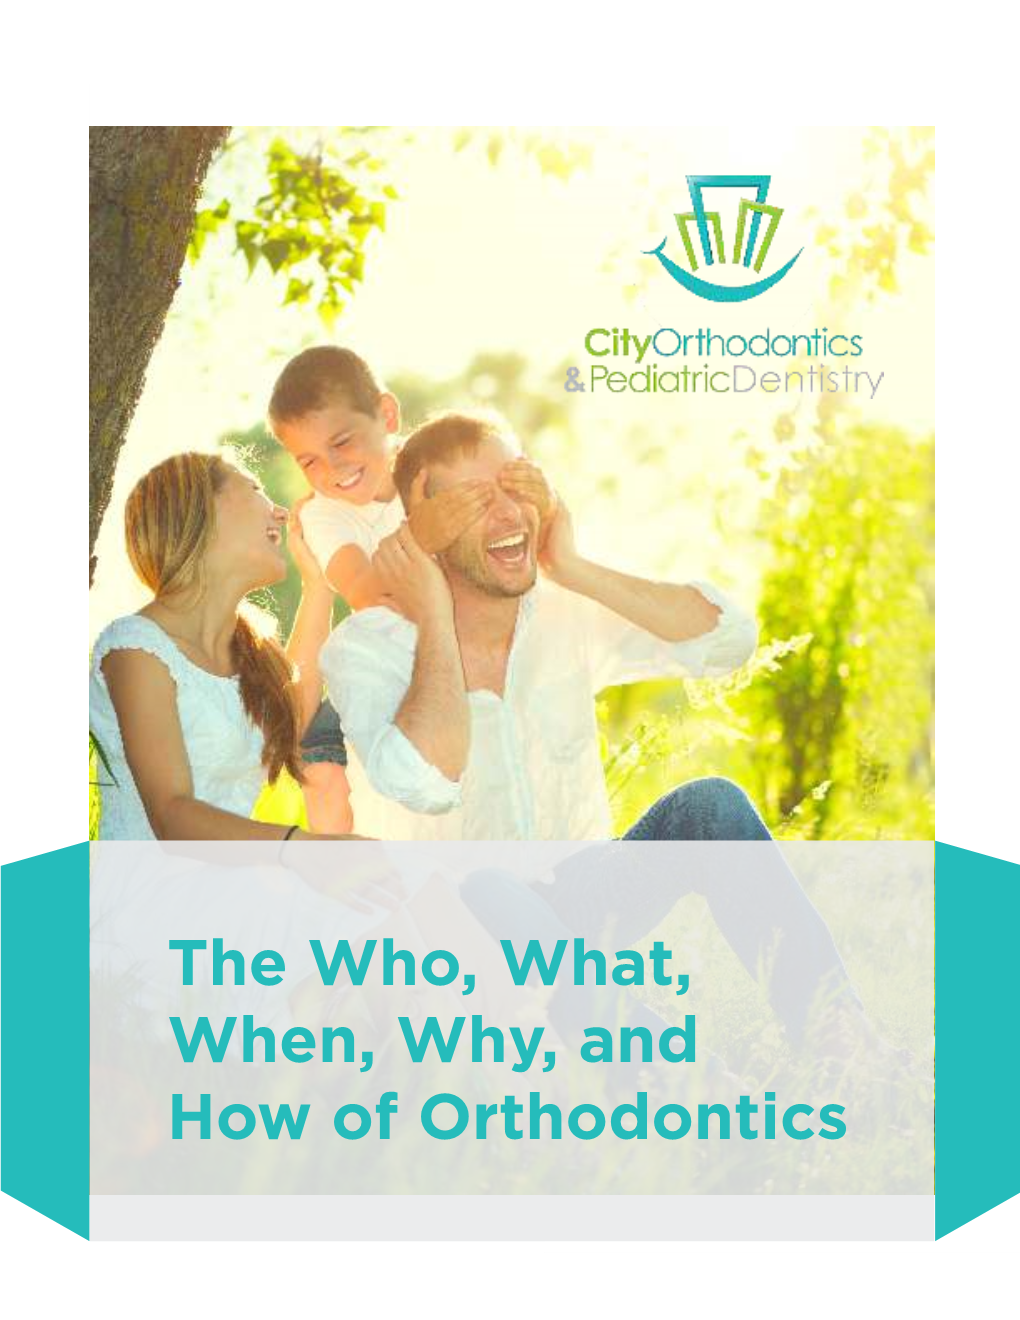 The Who, What, When, Why, and How of Orthodontics